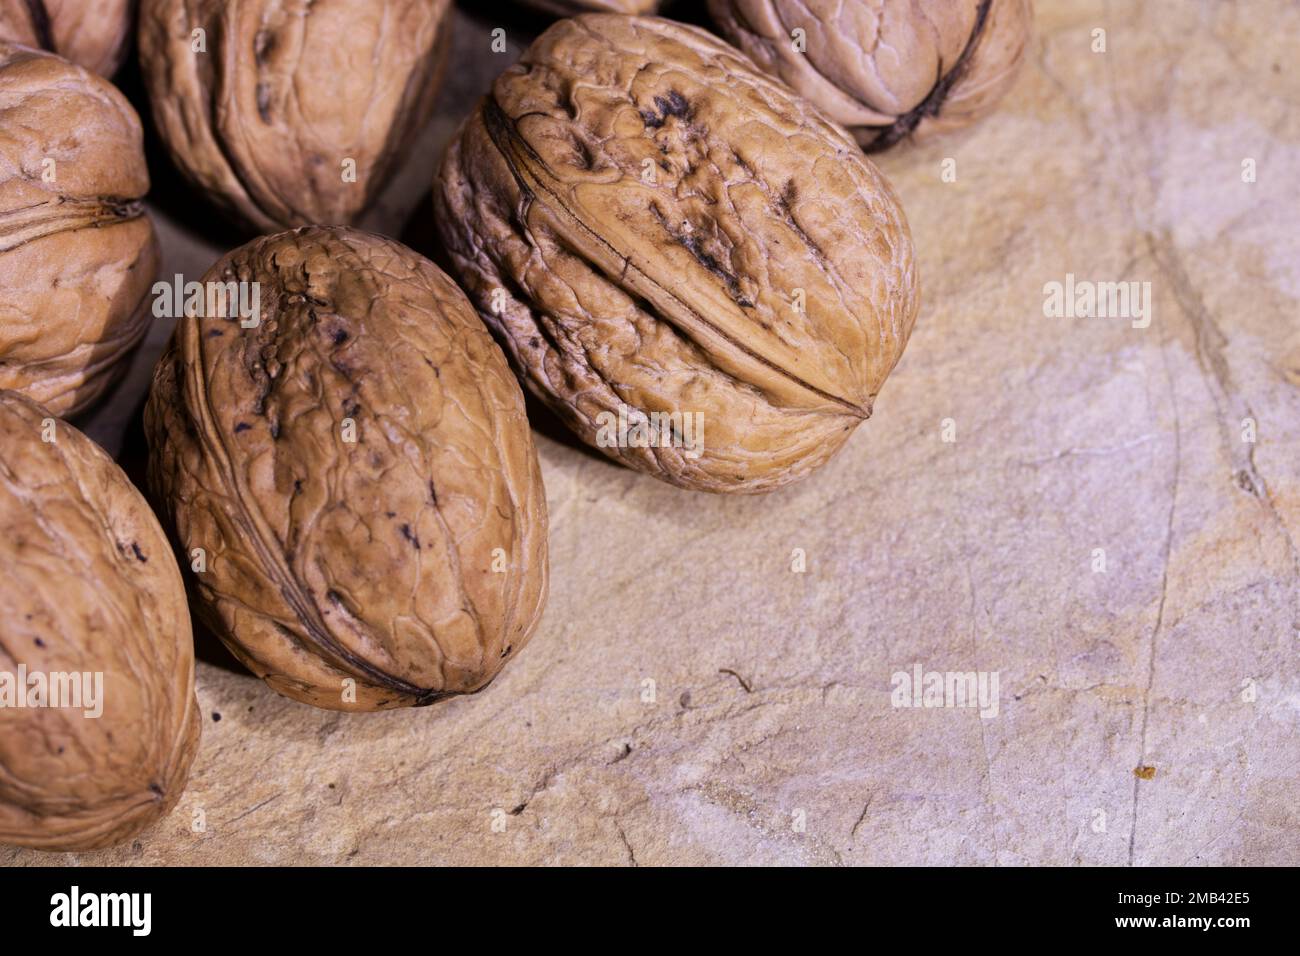 Organically grown nuts Stock Photo